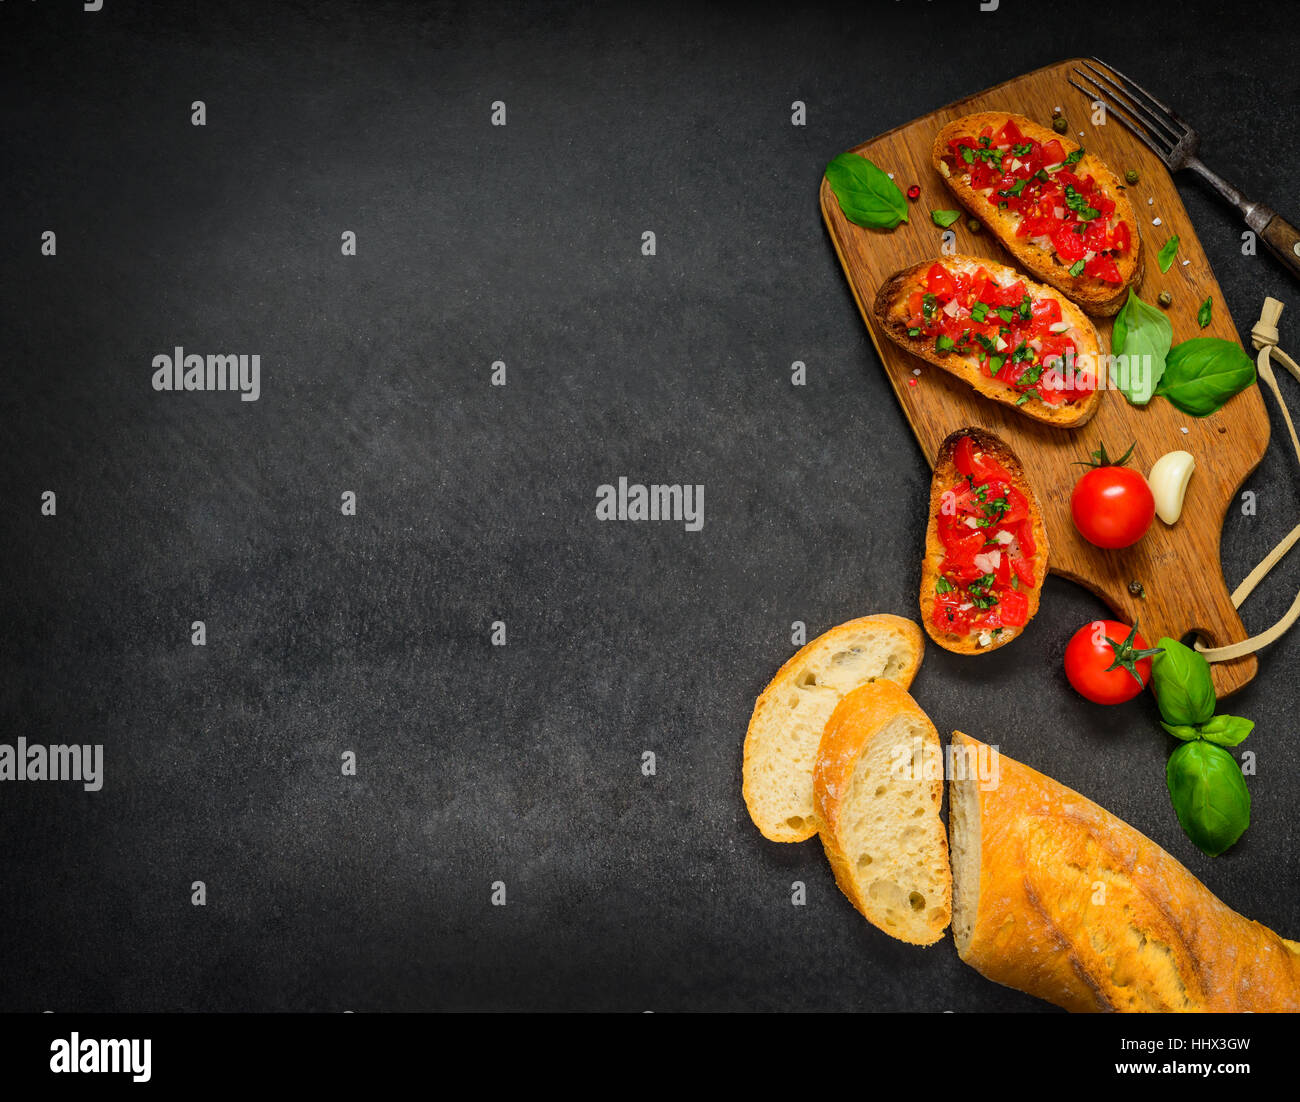 Bruschetta with French Bread and with Tomatoes and Basil on Copy Space Text Area Stock Photo